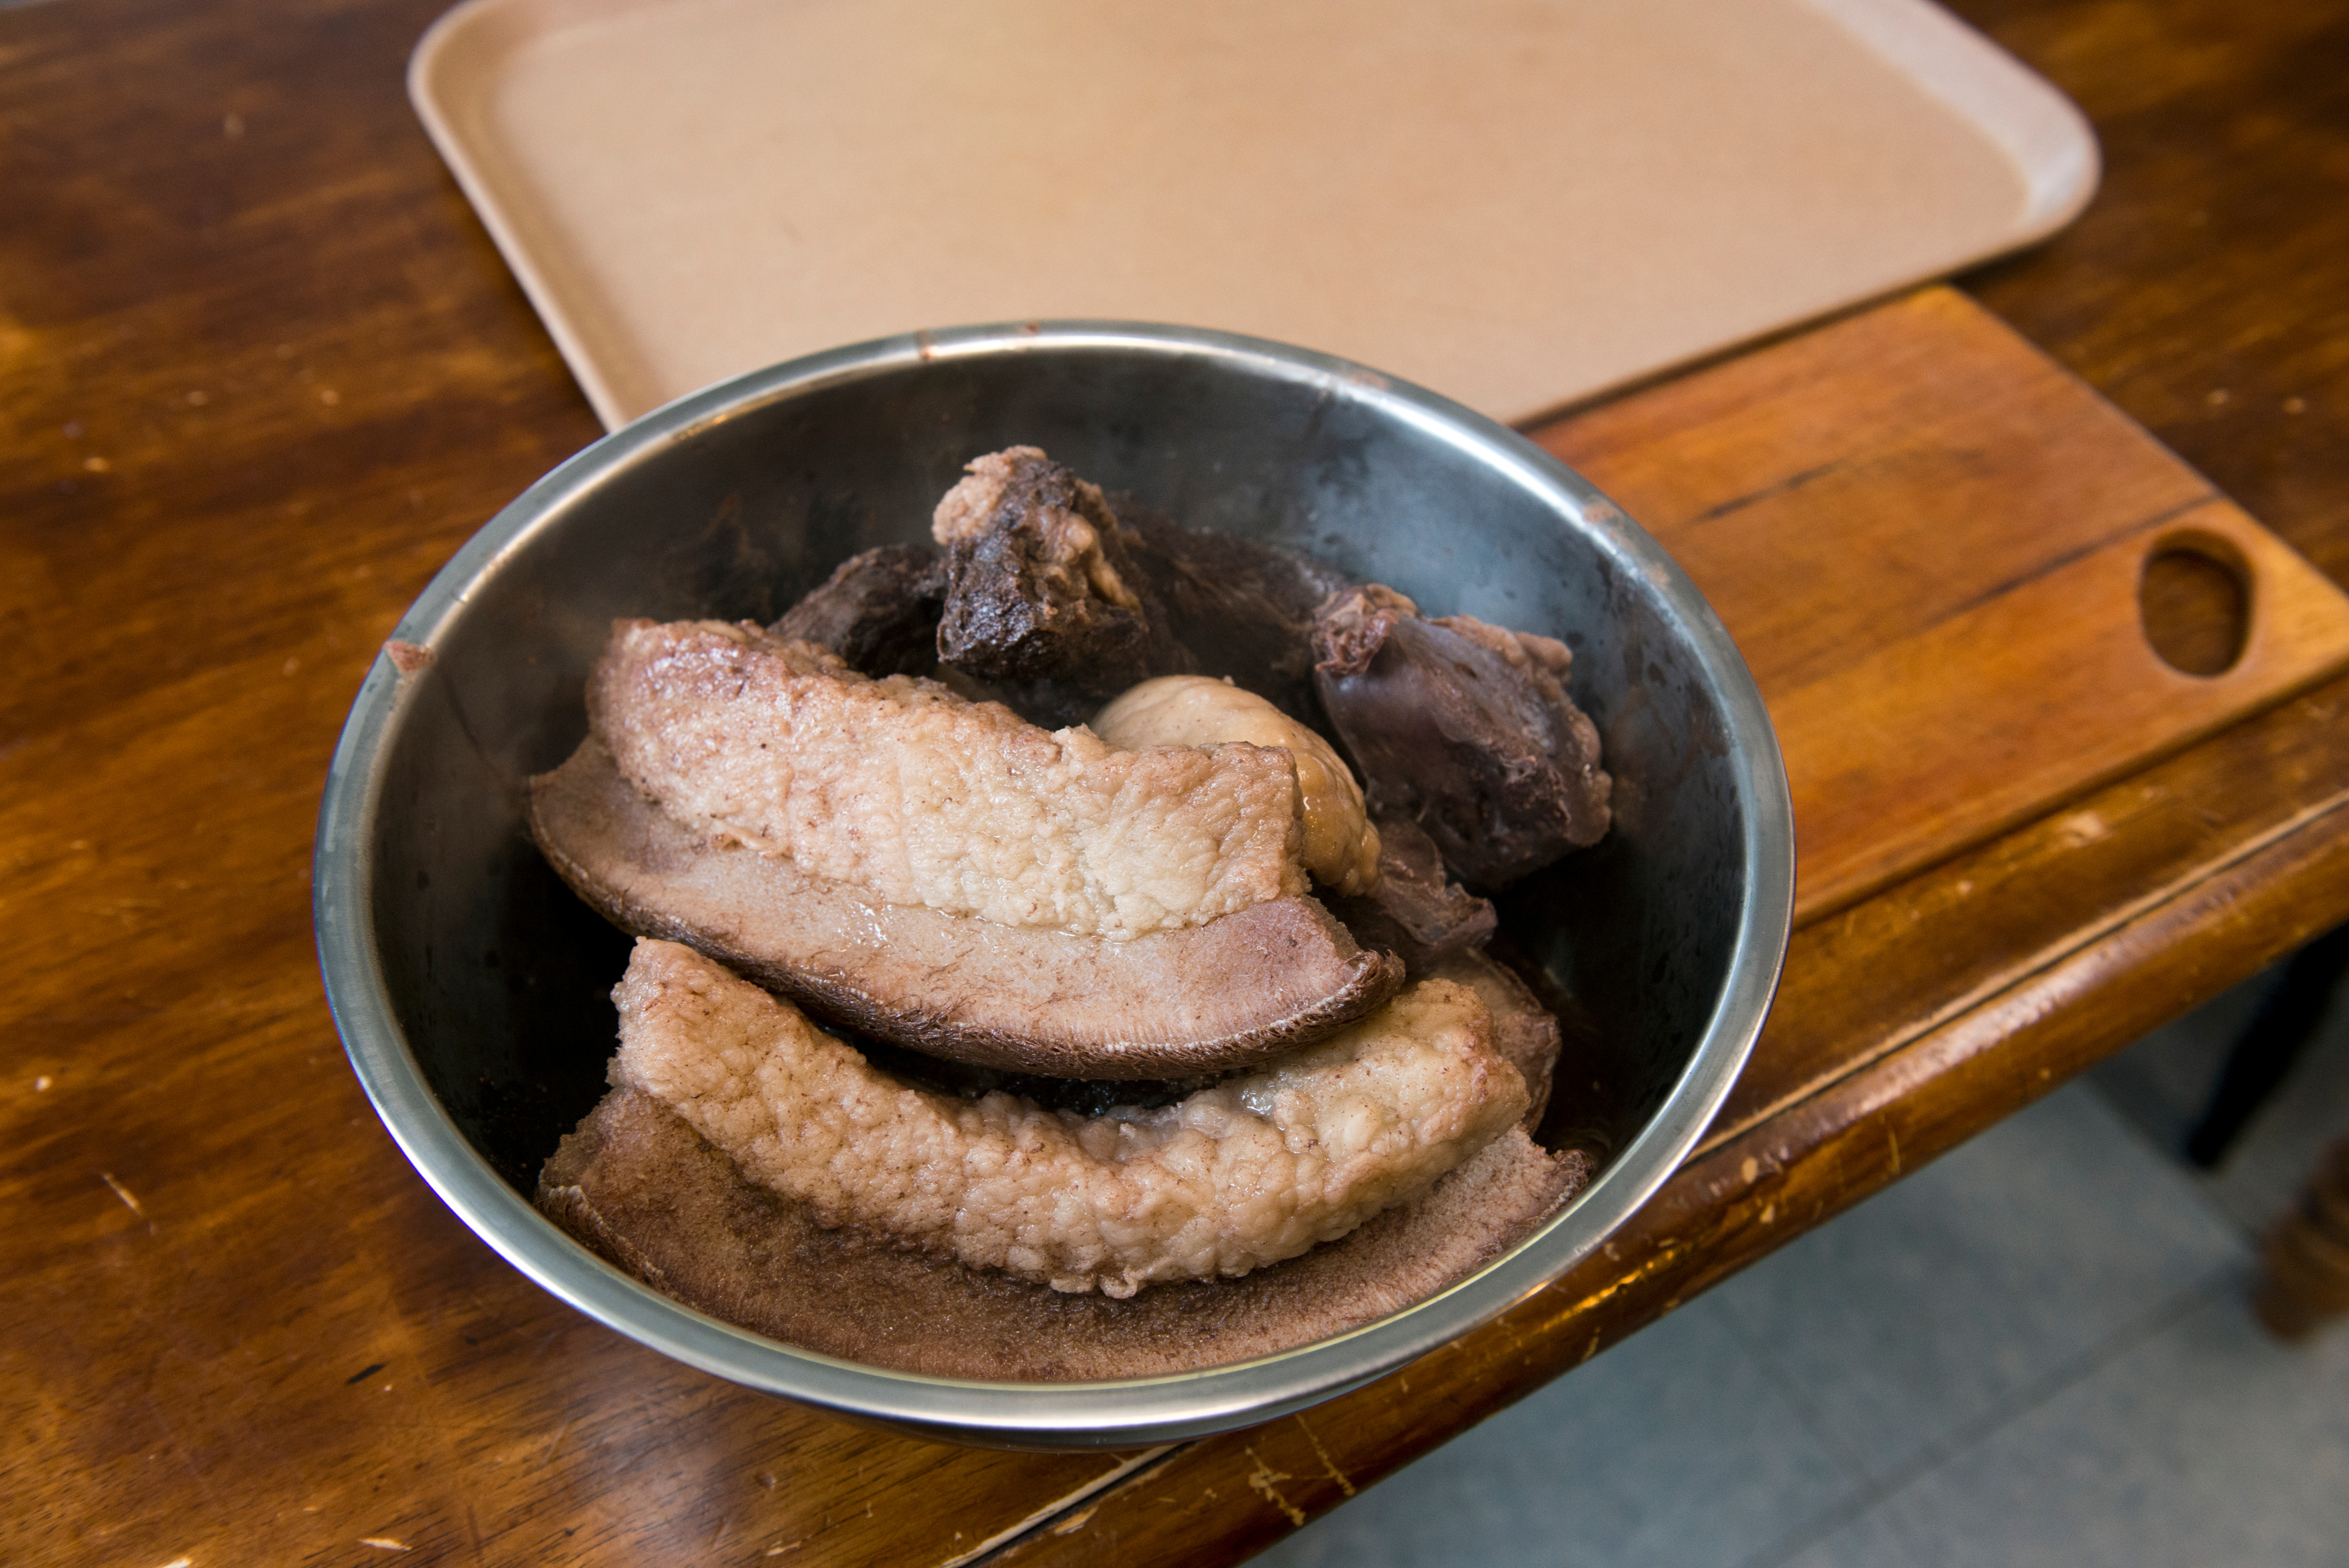 Boiled walrus skin, fat, meat and heart await cutting and serving. Rhona "Bunnie" Apassingok, prepared a meal of several different traditional subsistence foods for her 11-member household in Gambell on April 25, 2017. (Marc Lester / Alaska Dispatch News)